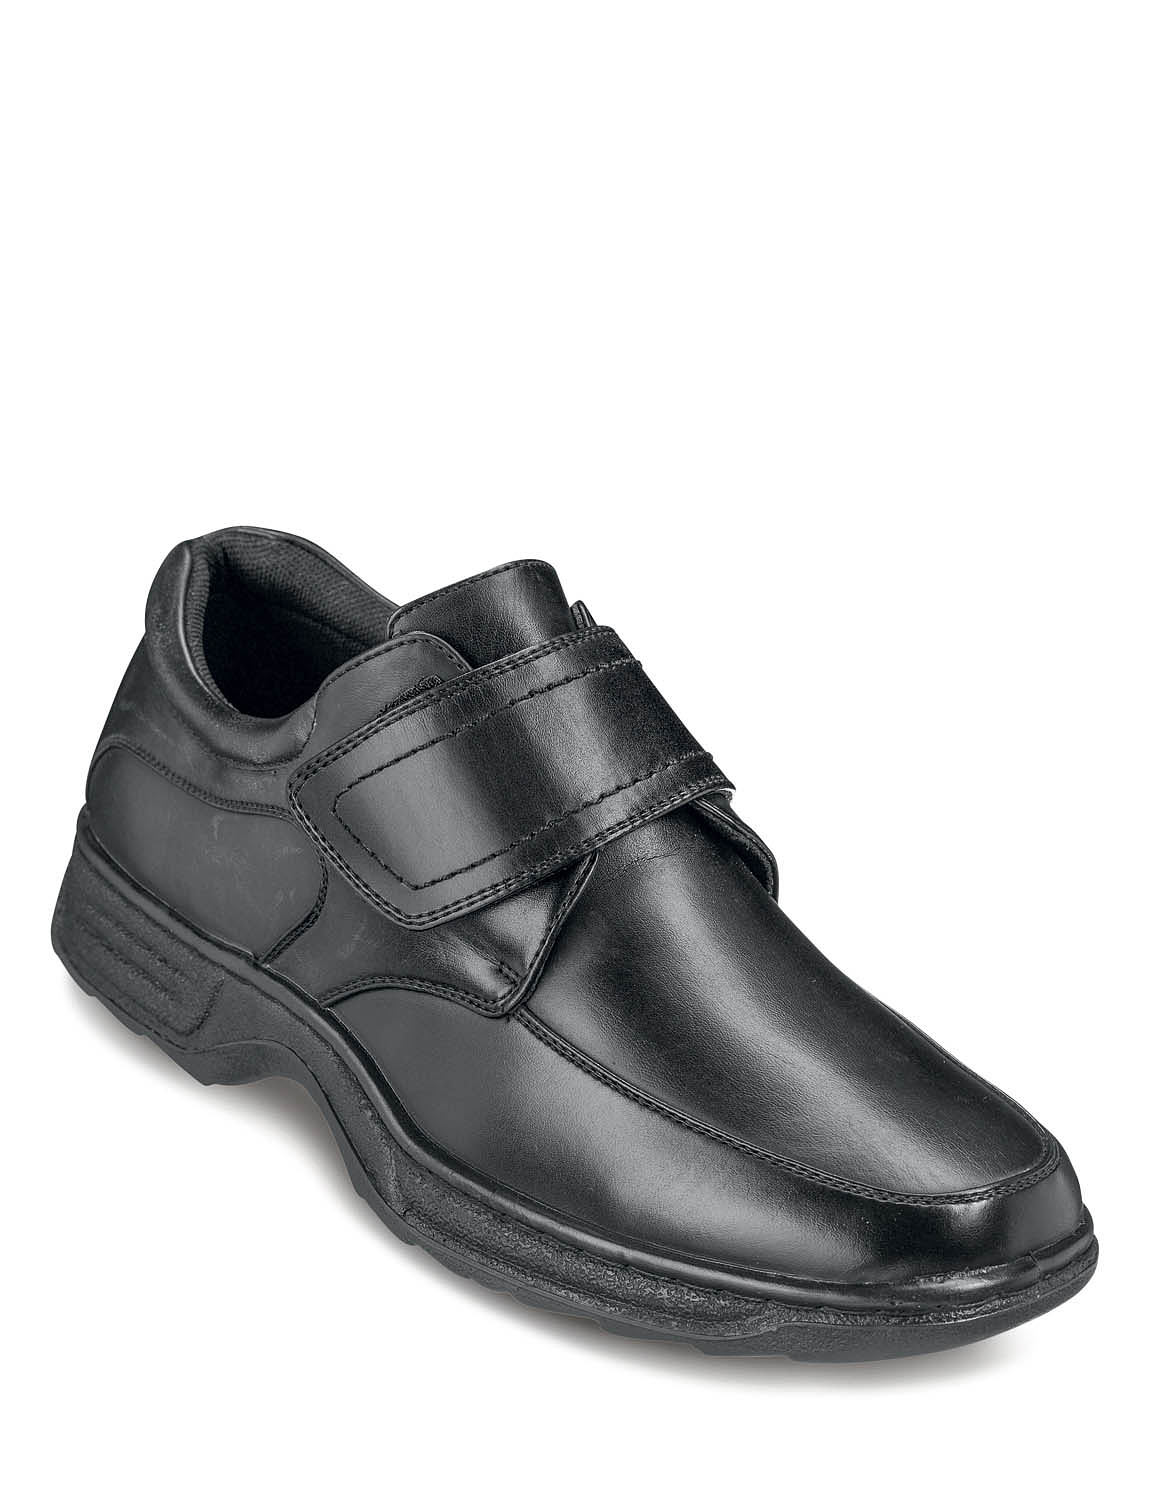 cushion walk shoes wide fit